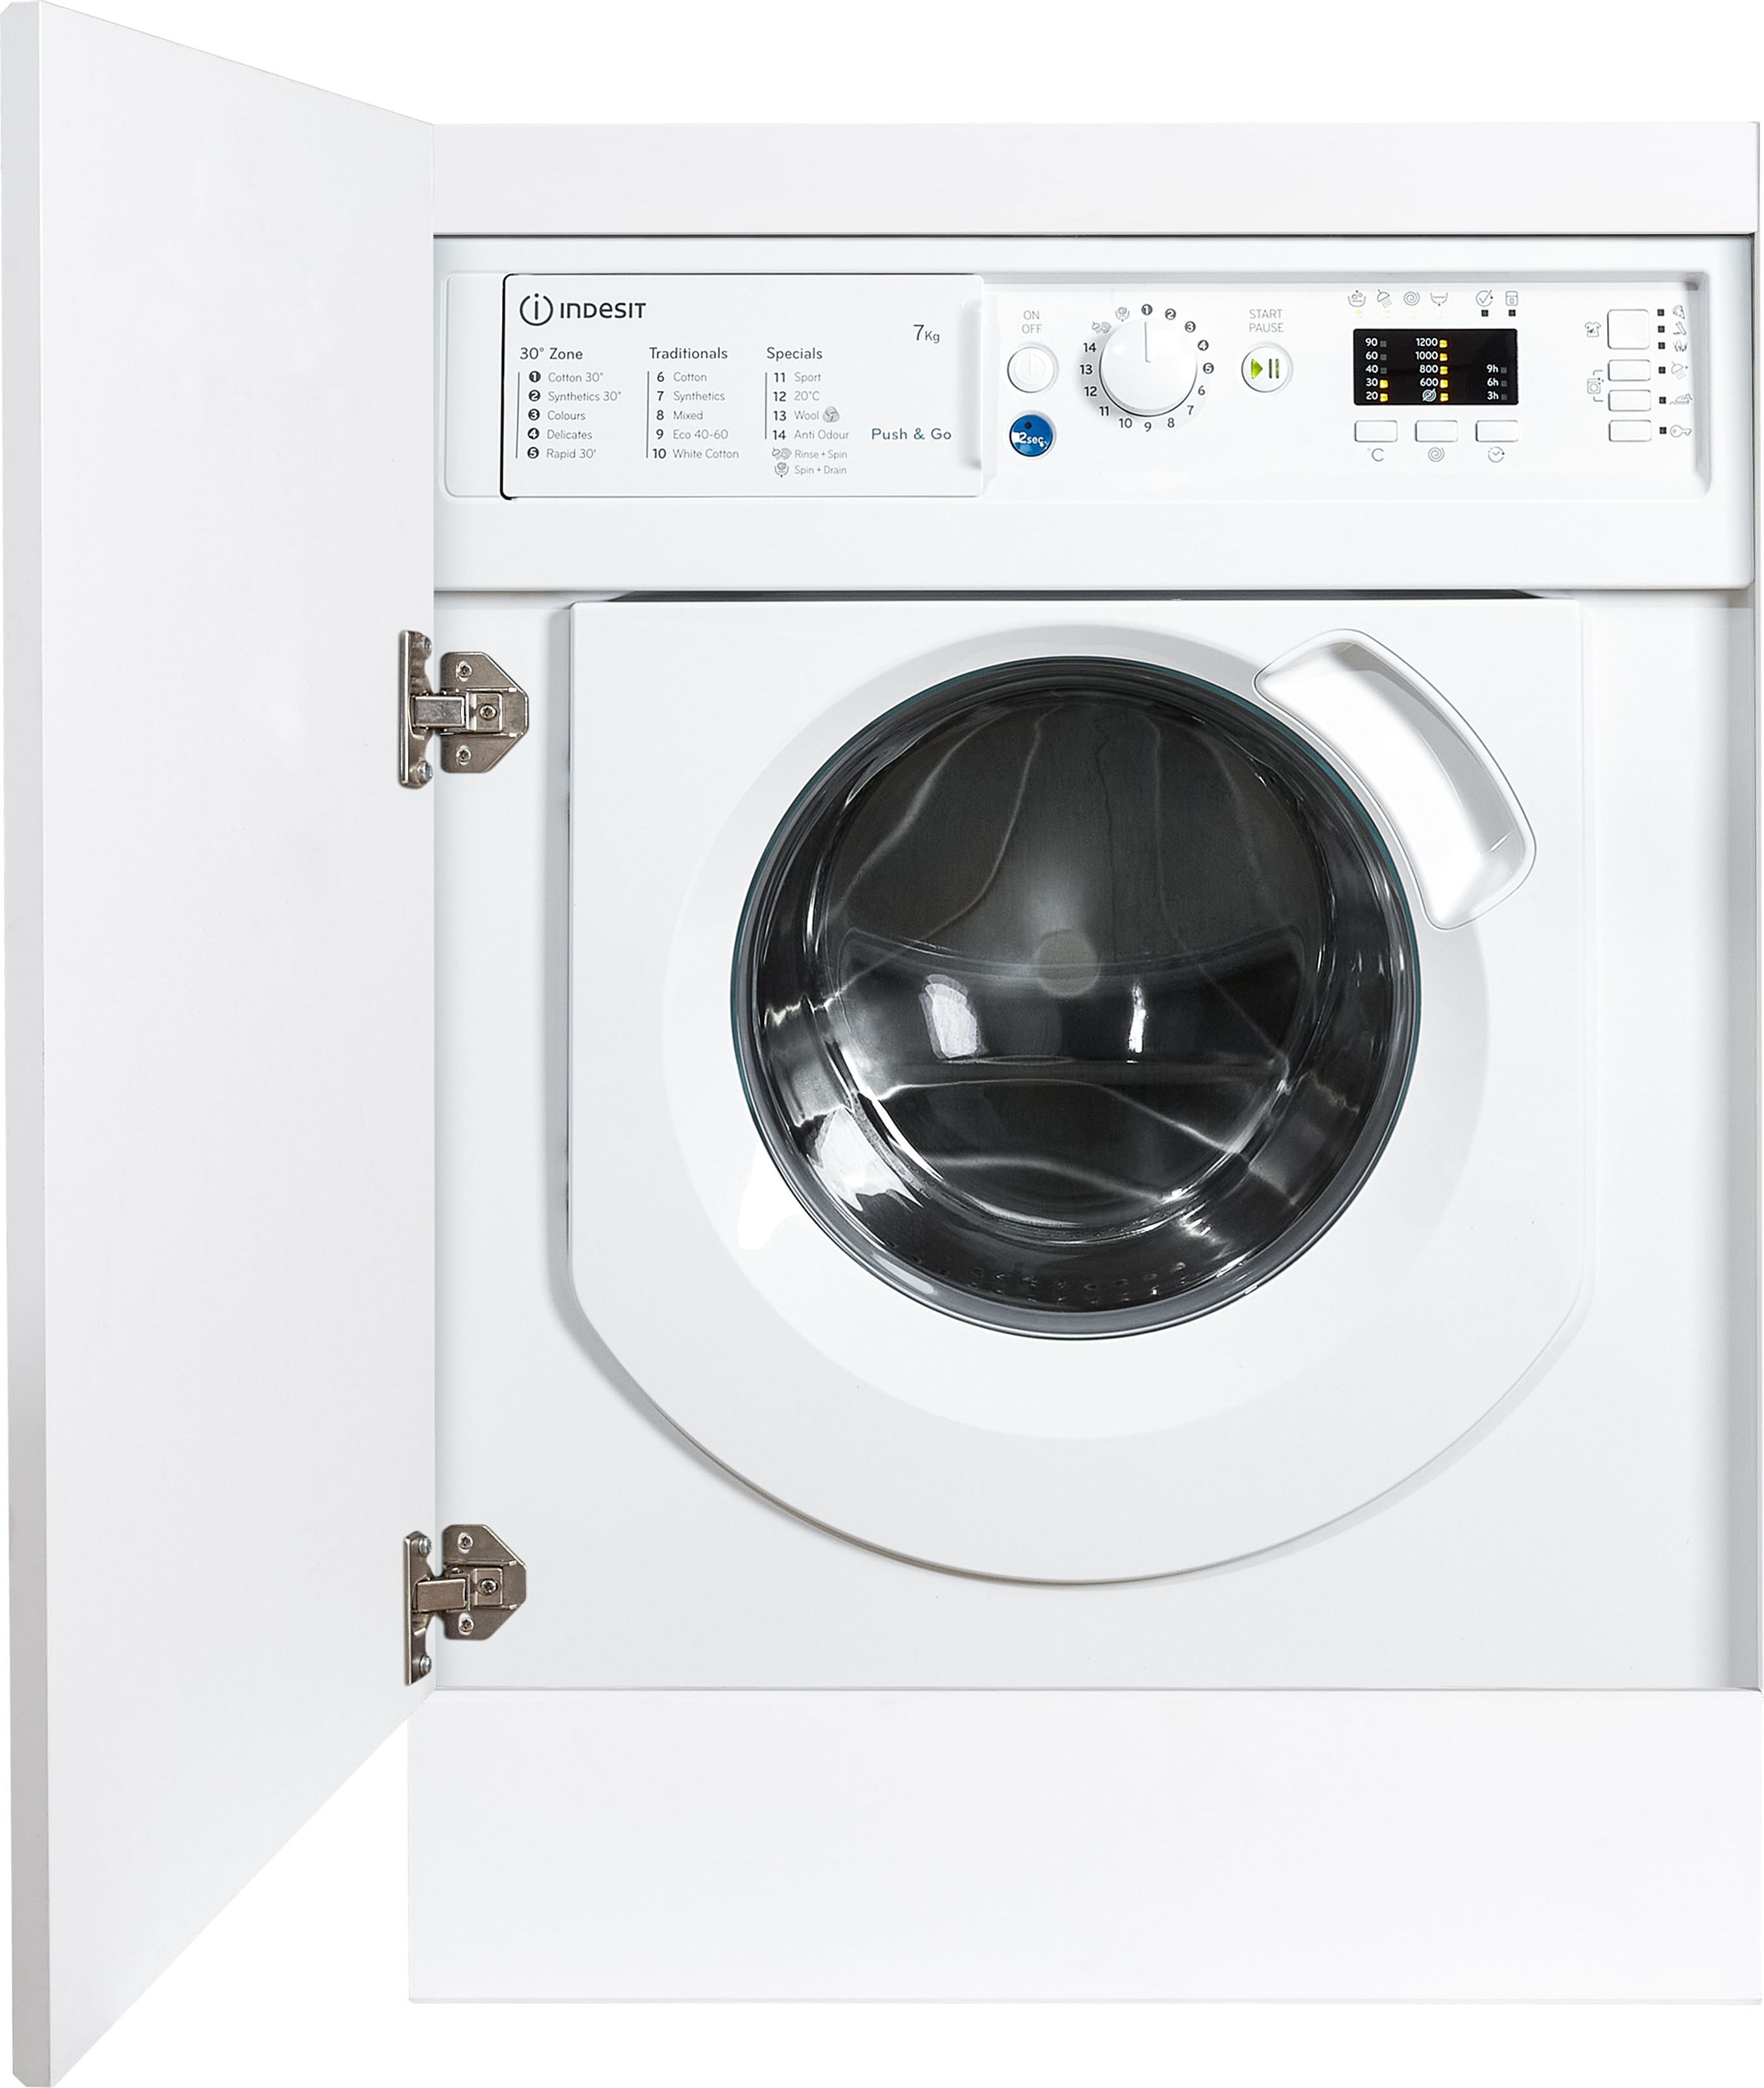 Indesit BIWMIL71252UKN Integrated 7kg Washing Machine with 1200 rpm - White - E Rated, White